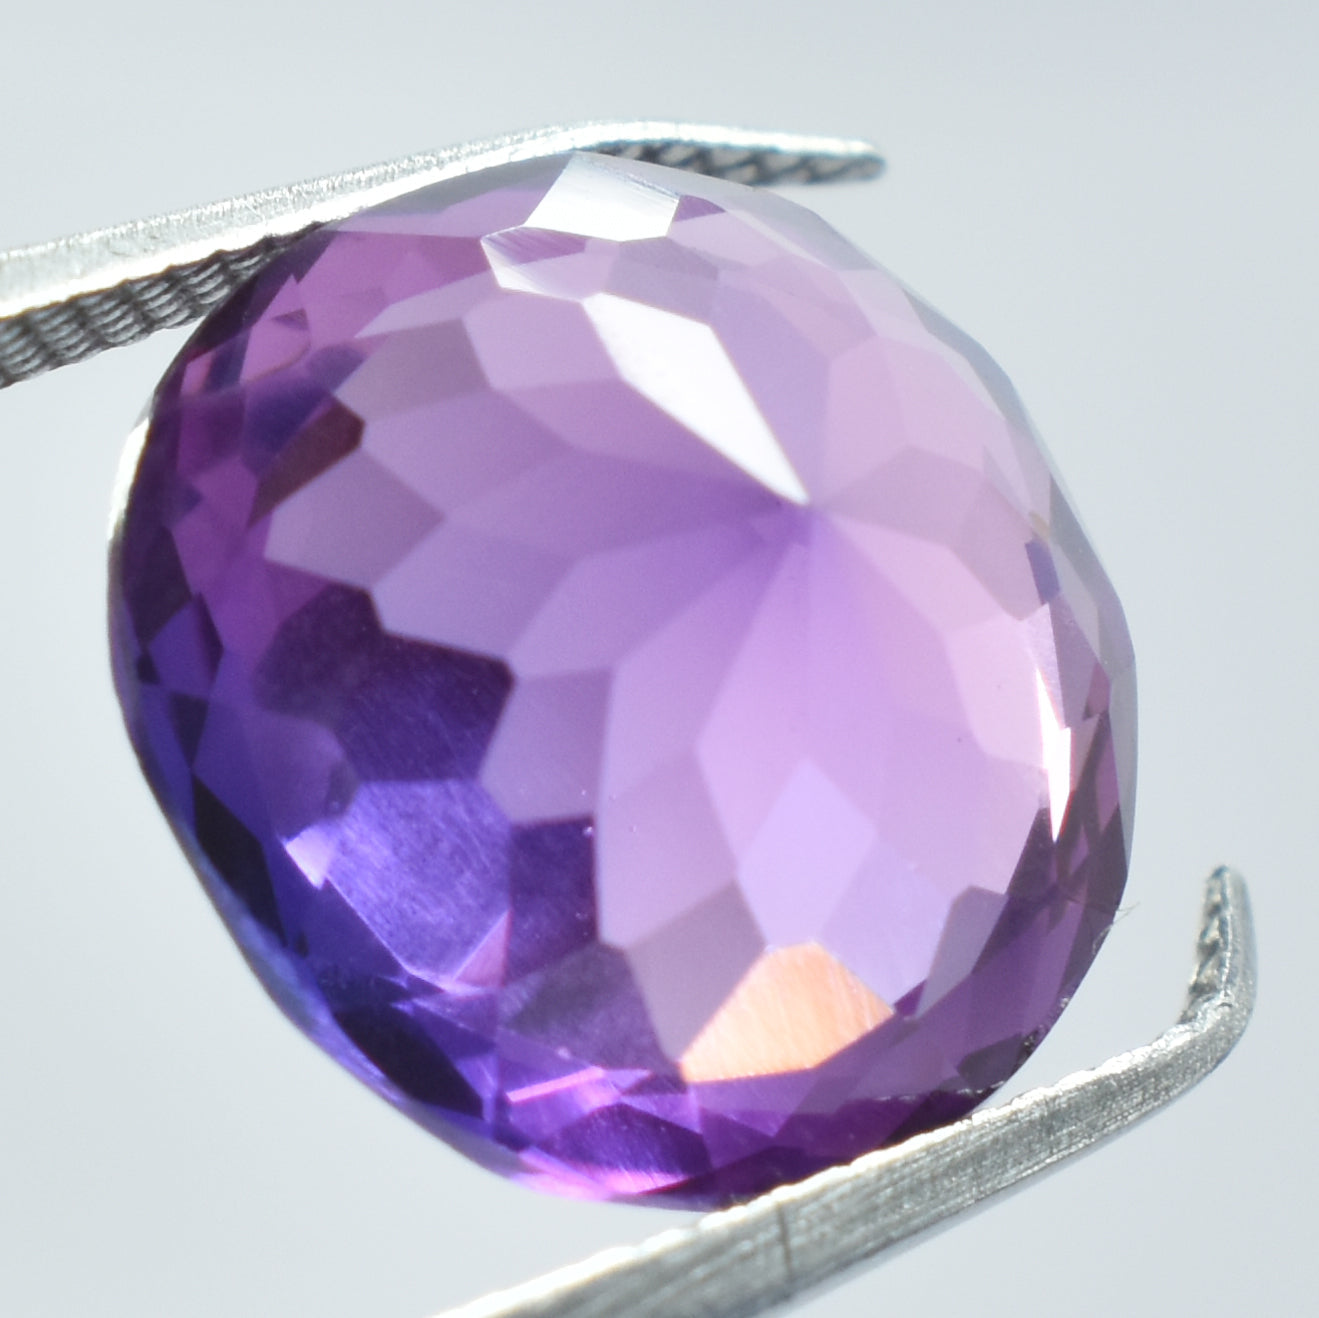 Round Cut Sapphire 10.52 Ct Glorious Color Change Top Quality Loose Gemstone Certified Natural Purple Sapphire ,Best For Exquisite Beauty & Symbolism , Wedding Gift